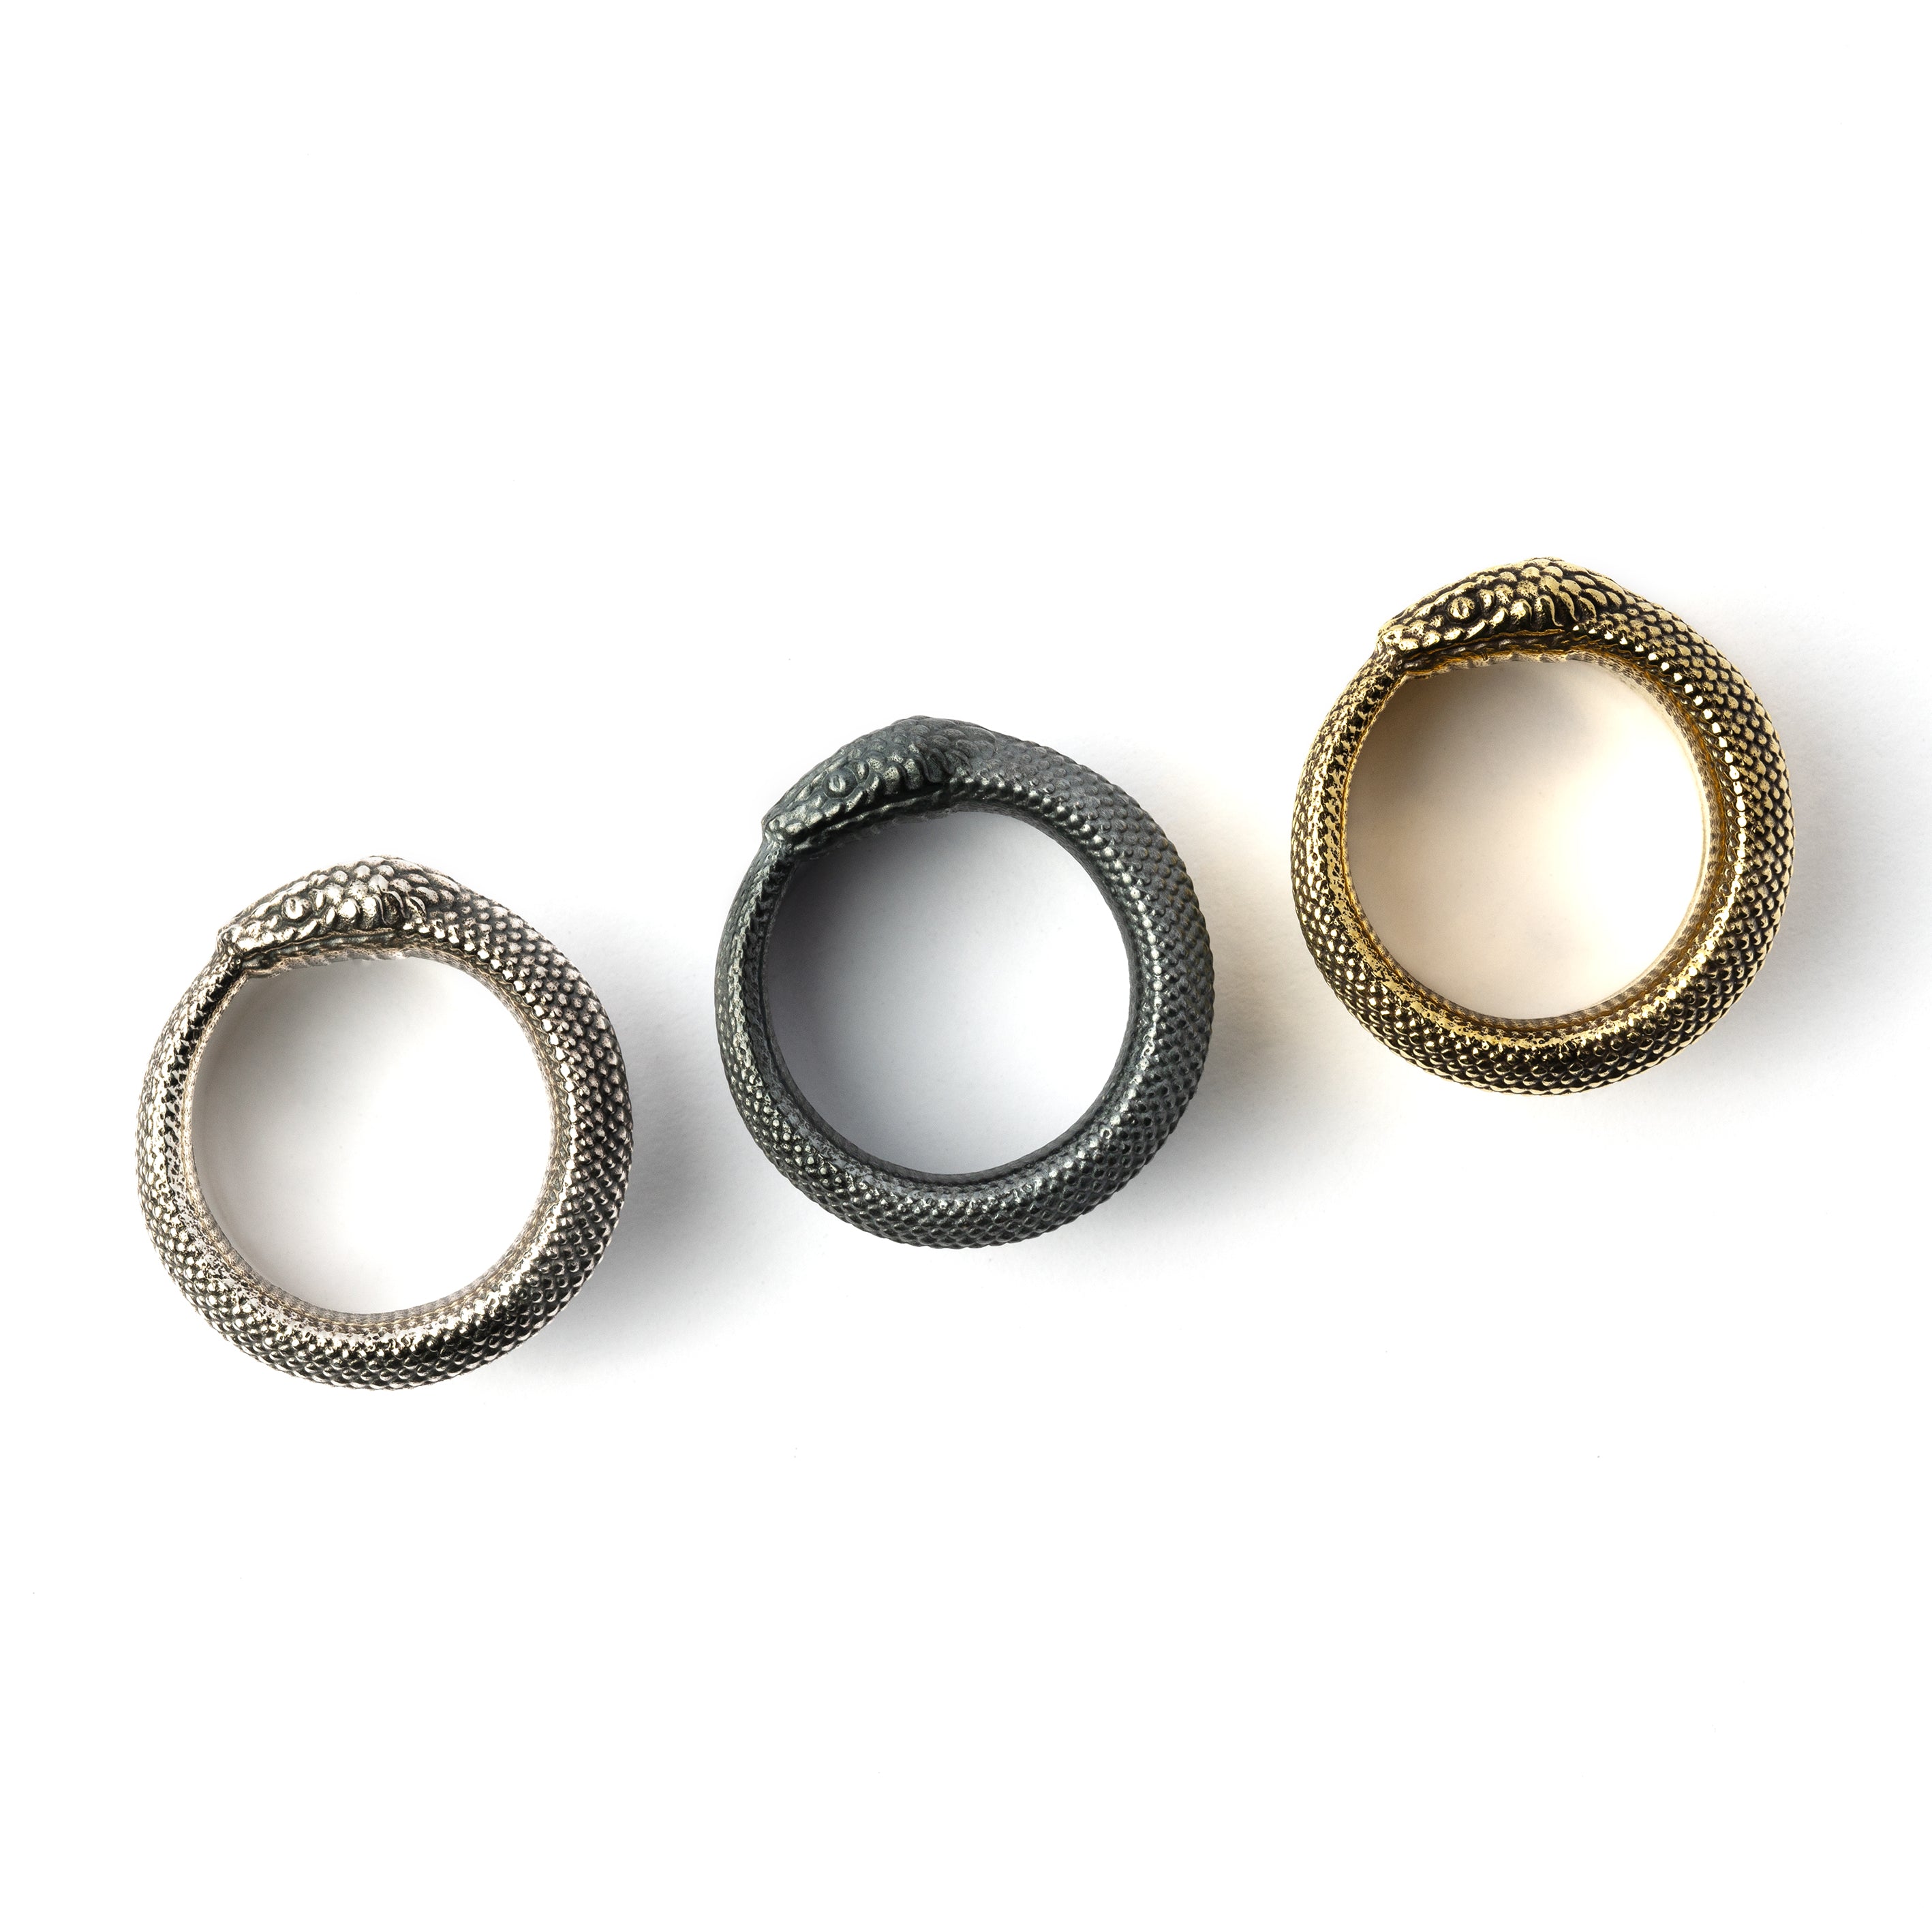 Ouroboros black silver, silver and brass ear tunnels frontal view